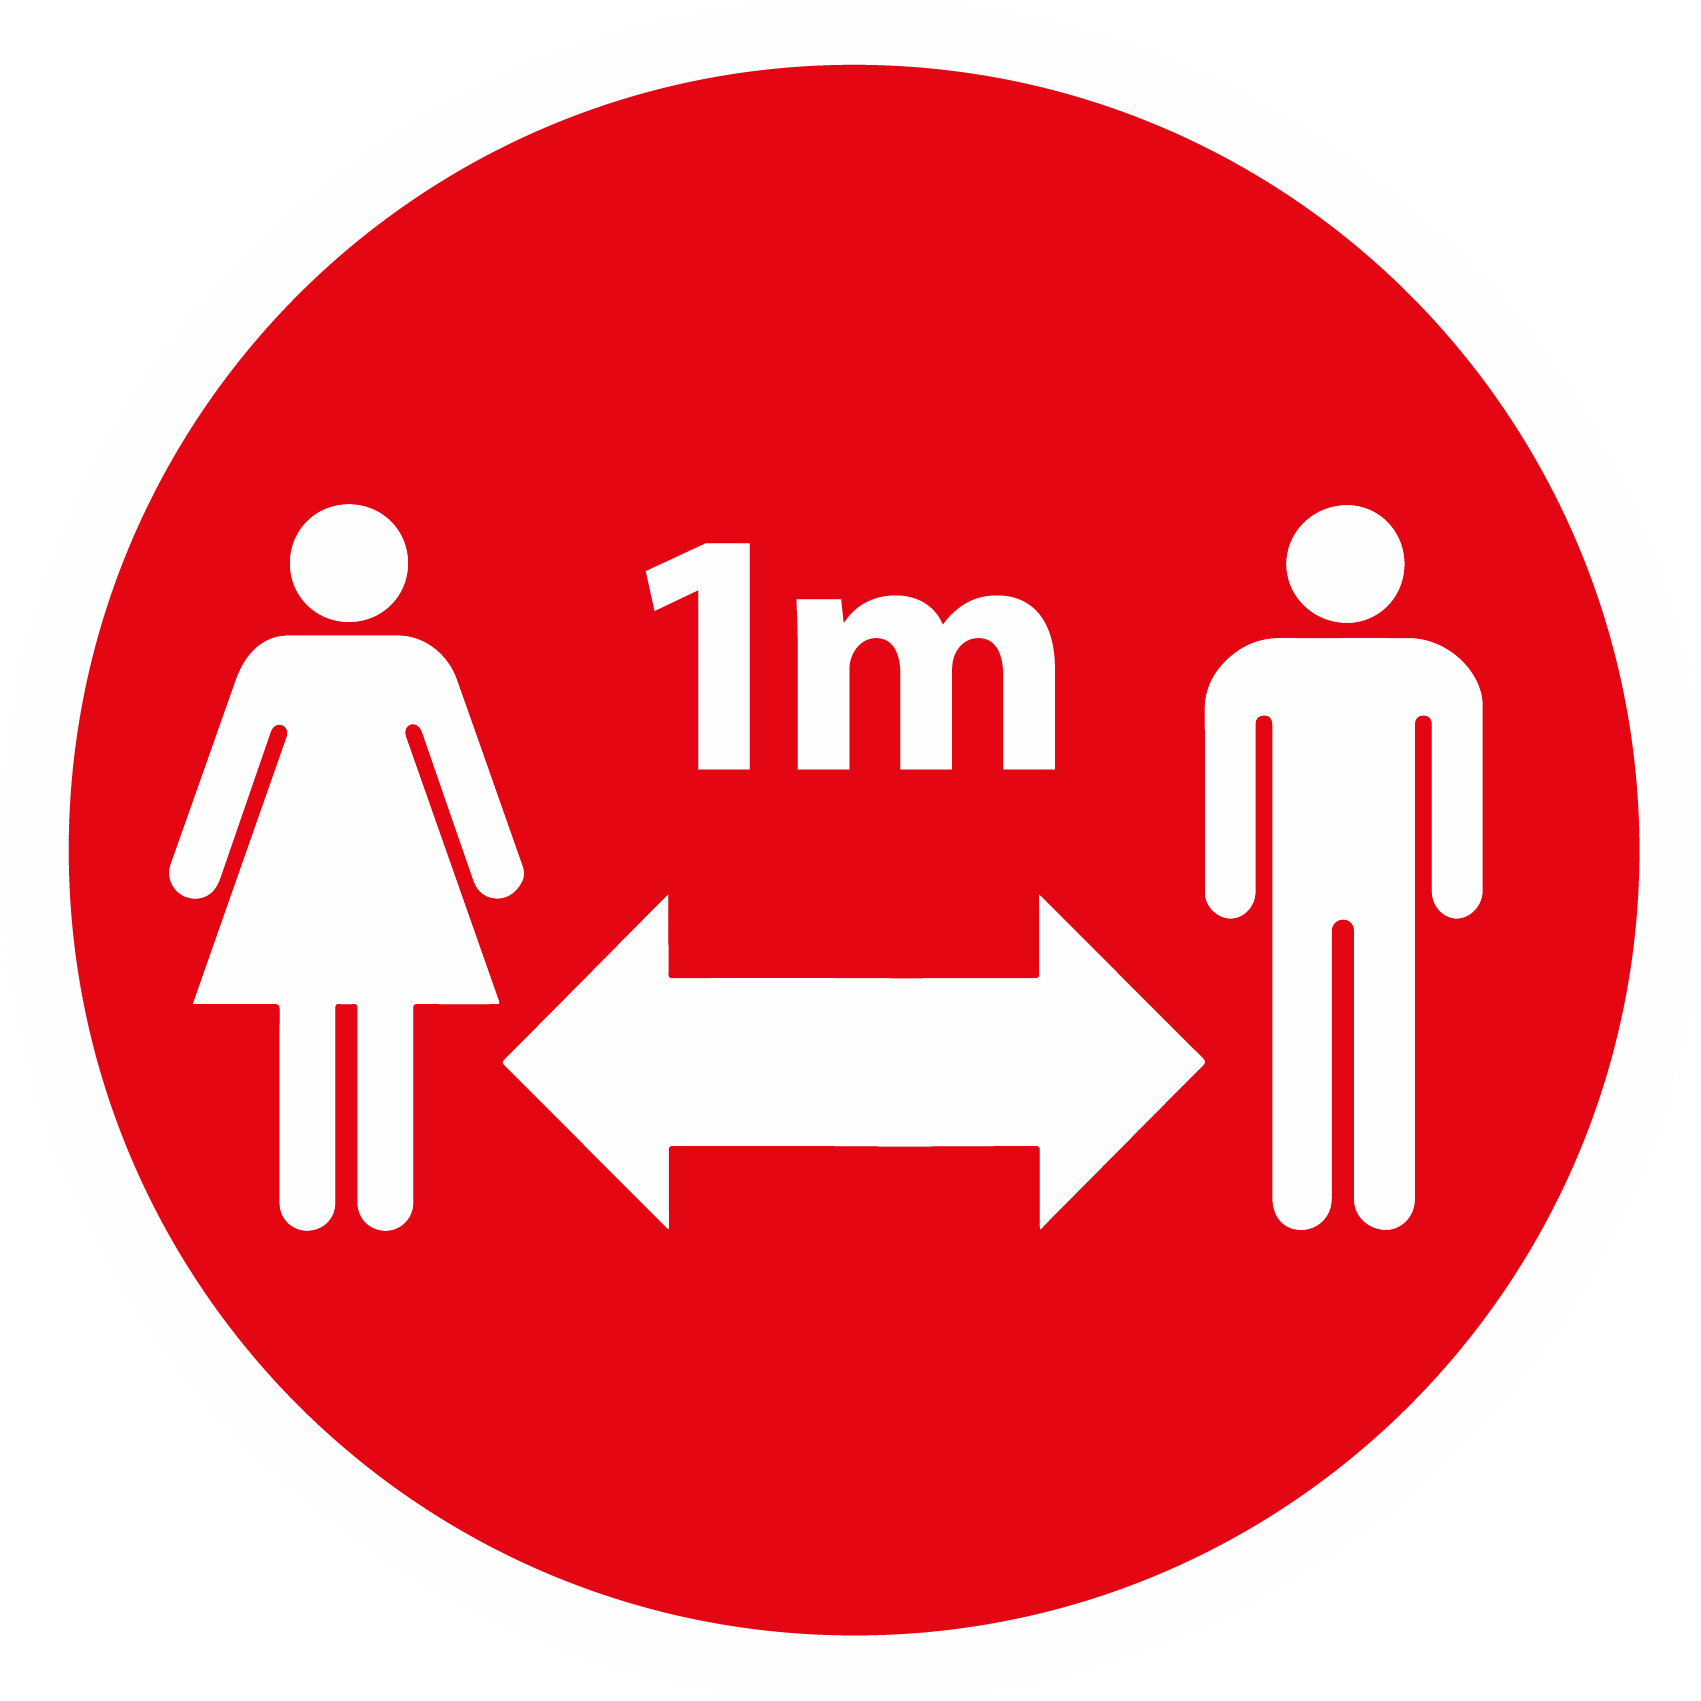 1m Distance (Red)